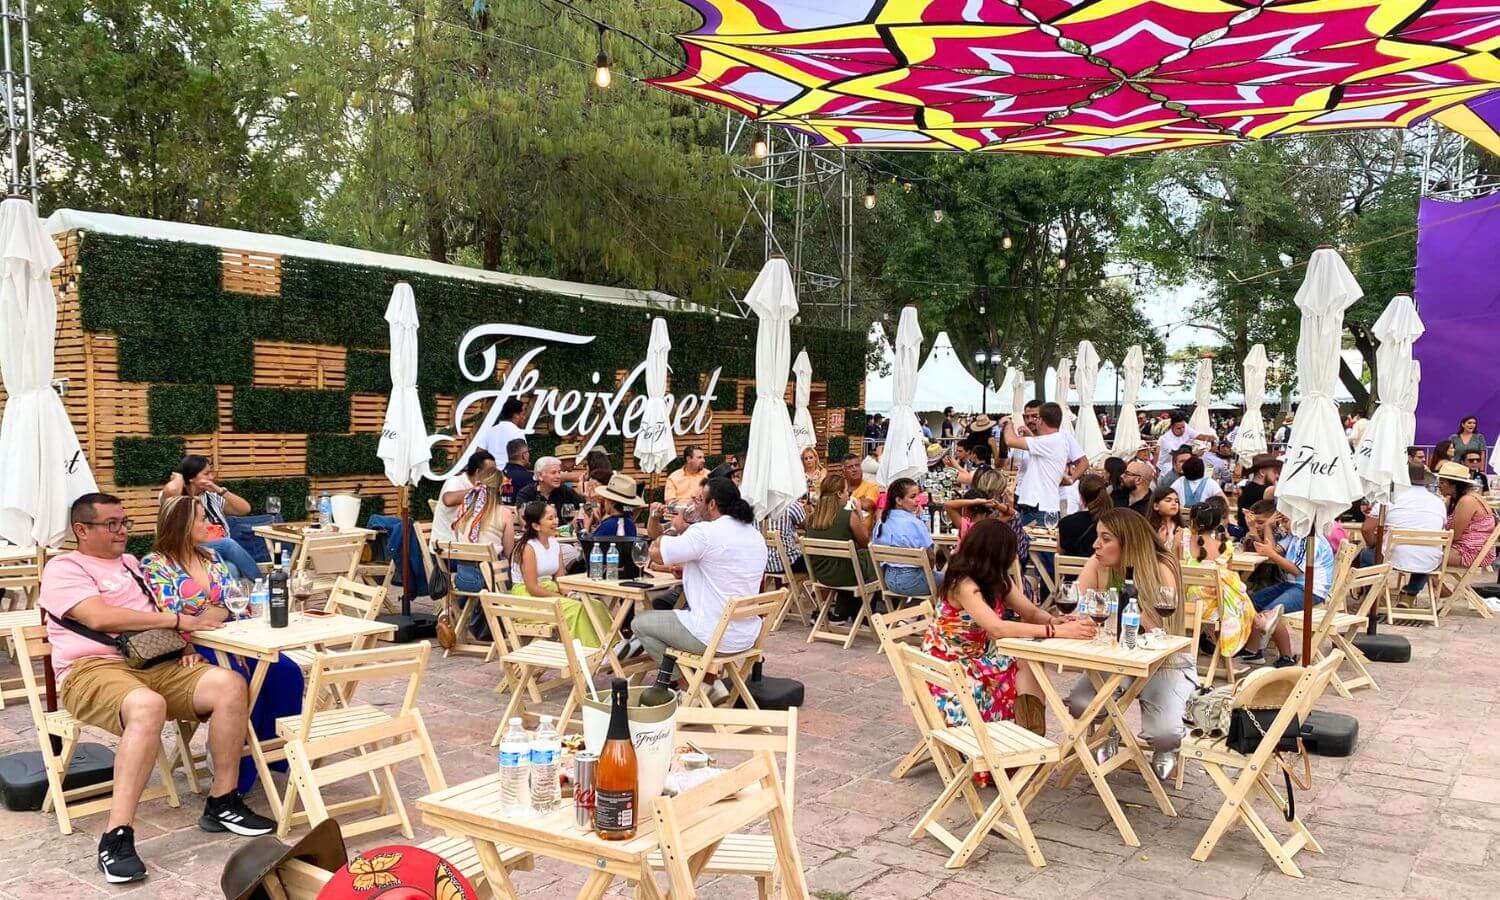 People sat sampling wine and food in front of the Freixenet booth at one of the Mexican Food and Wine Festivals